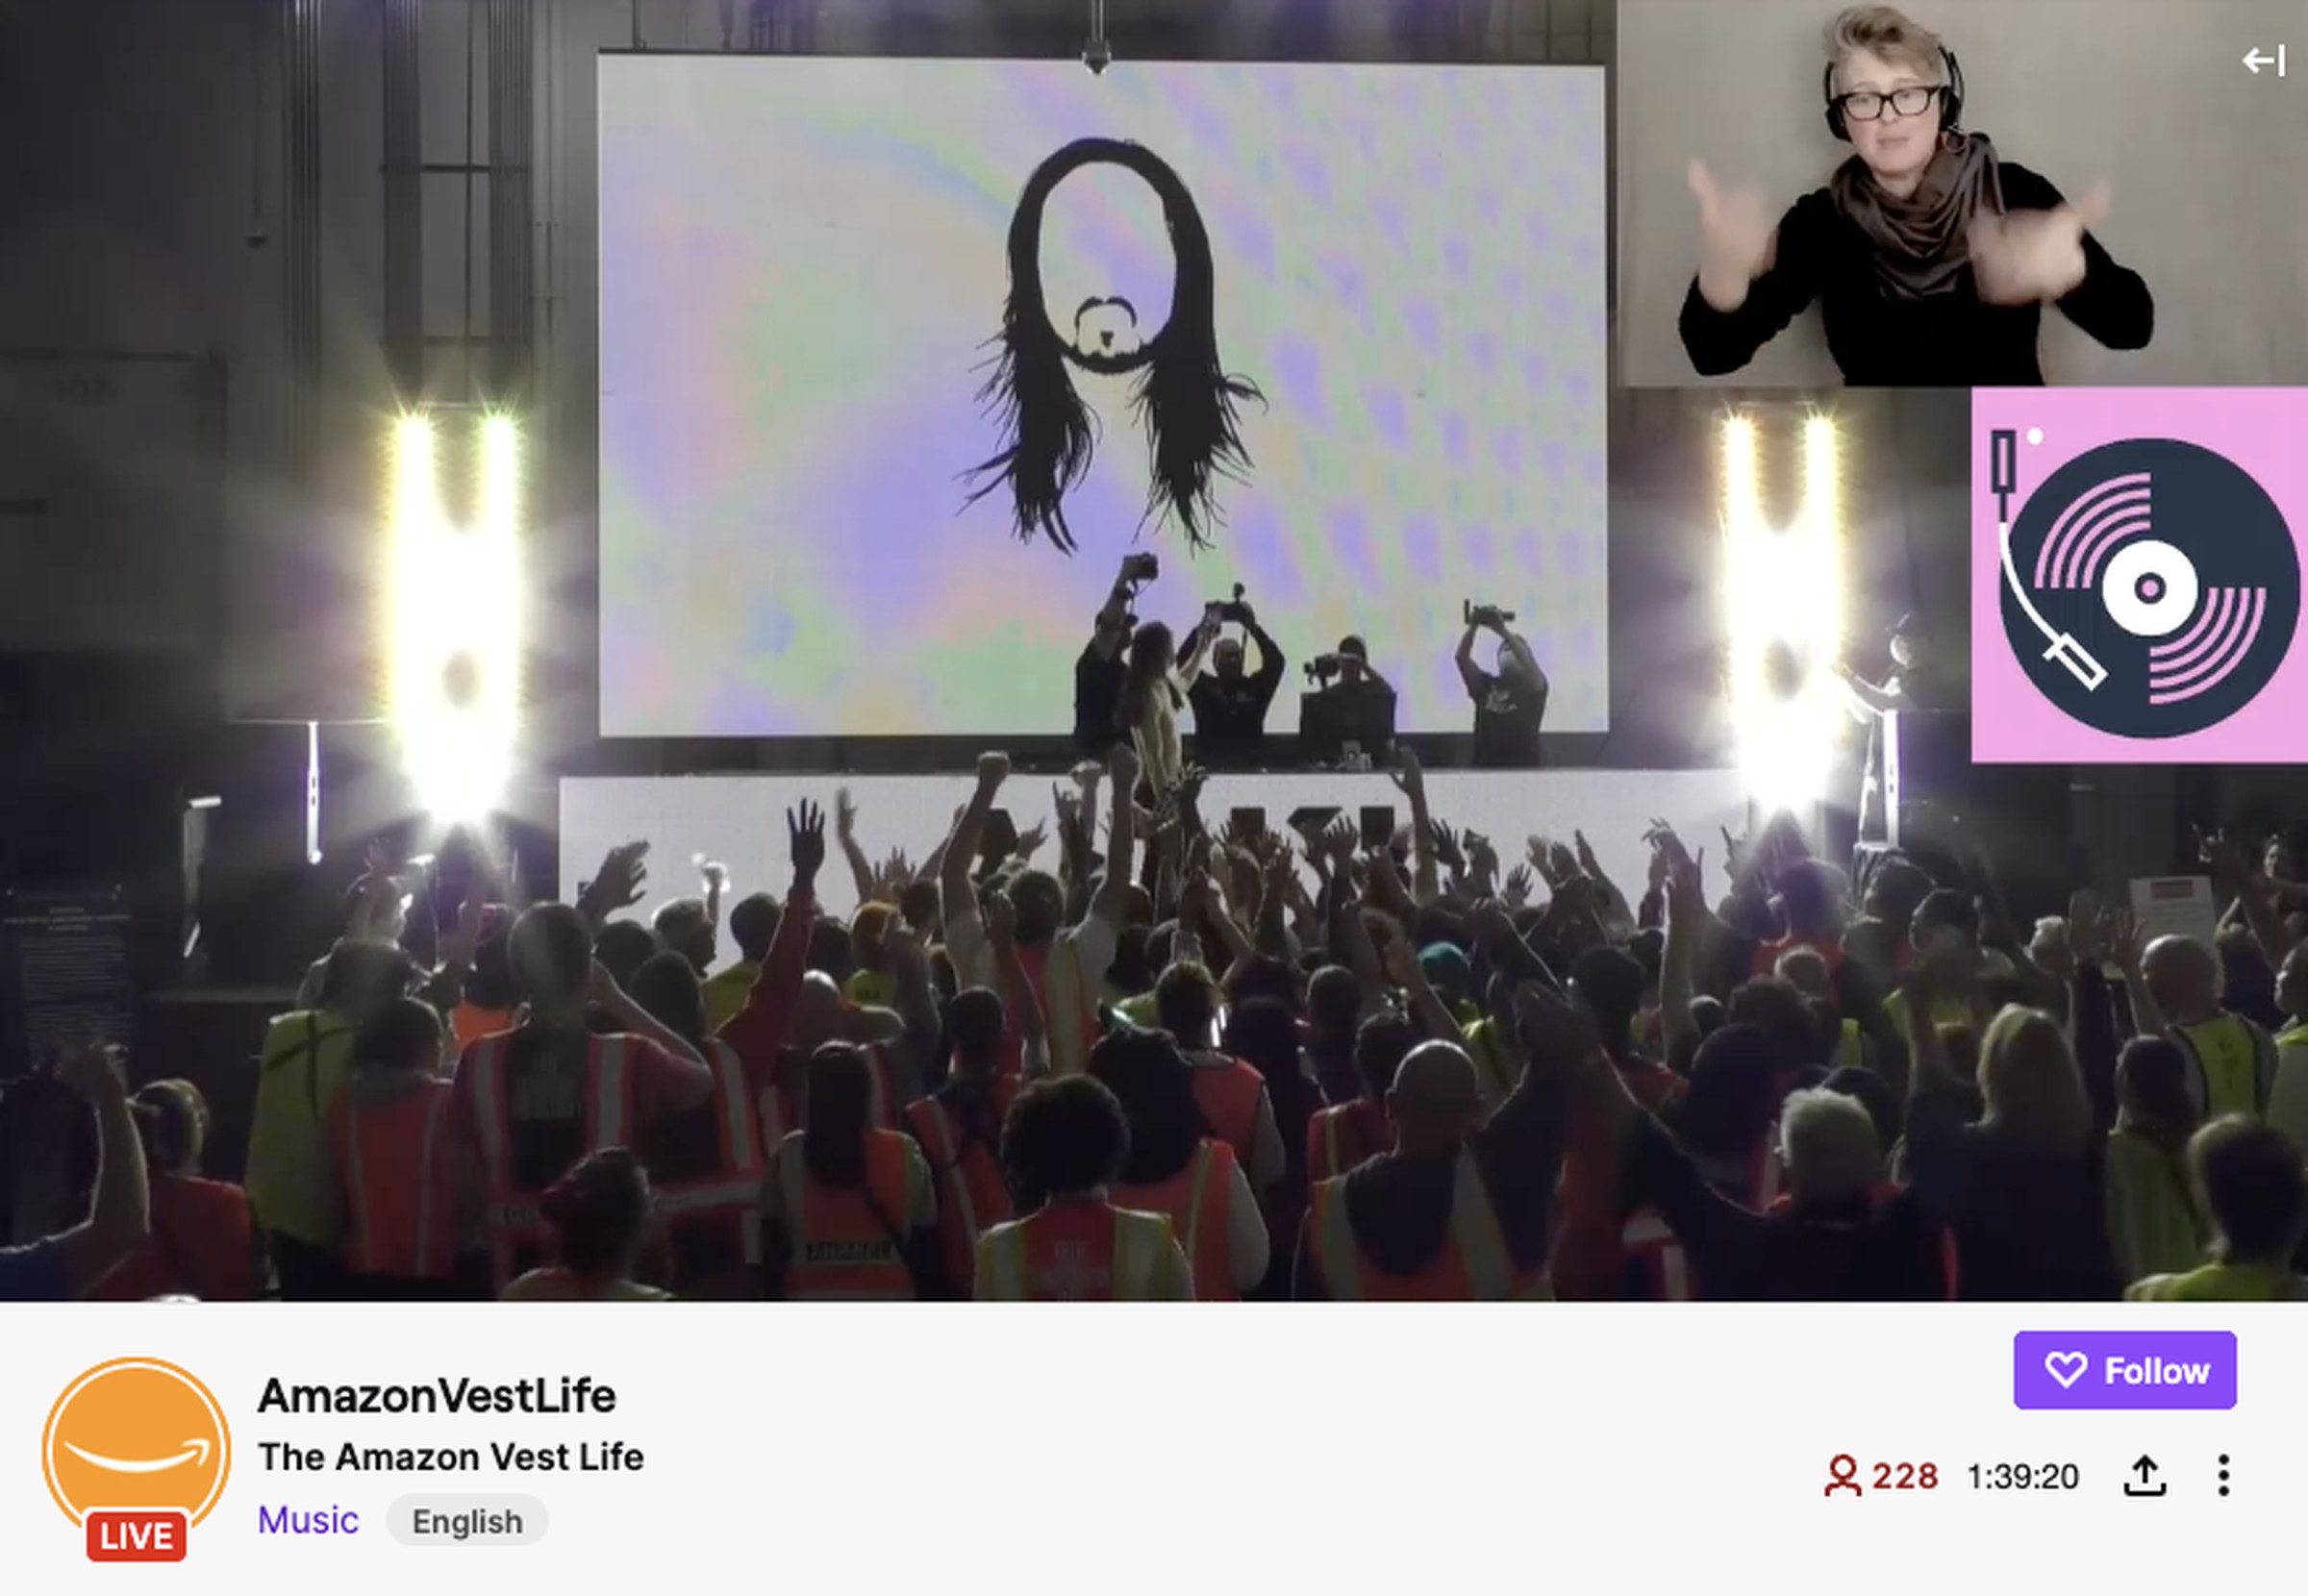 Screenshot from the Twitch channel of Steve Aoki's performance for Amazon workers.